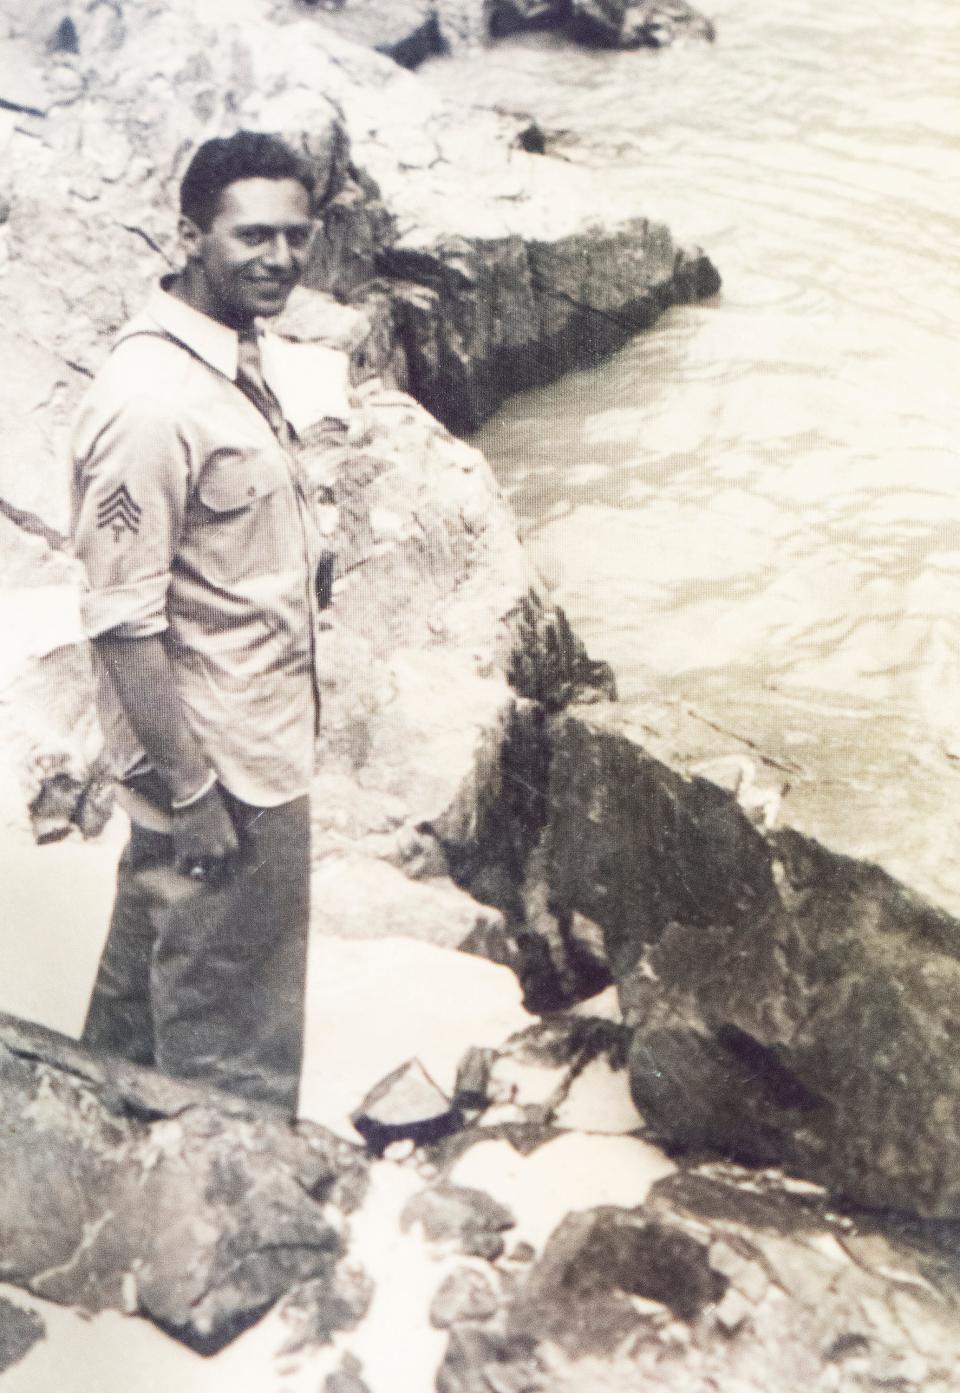 Arthur Levy pictured at the Grand Canyon in 1945. Arthur Levy was a member of the Manhattan Project's Los Alamos Laboratory, headed by J. Robert Oppenheimer.